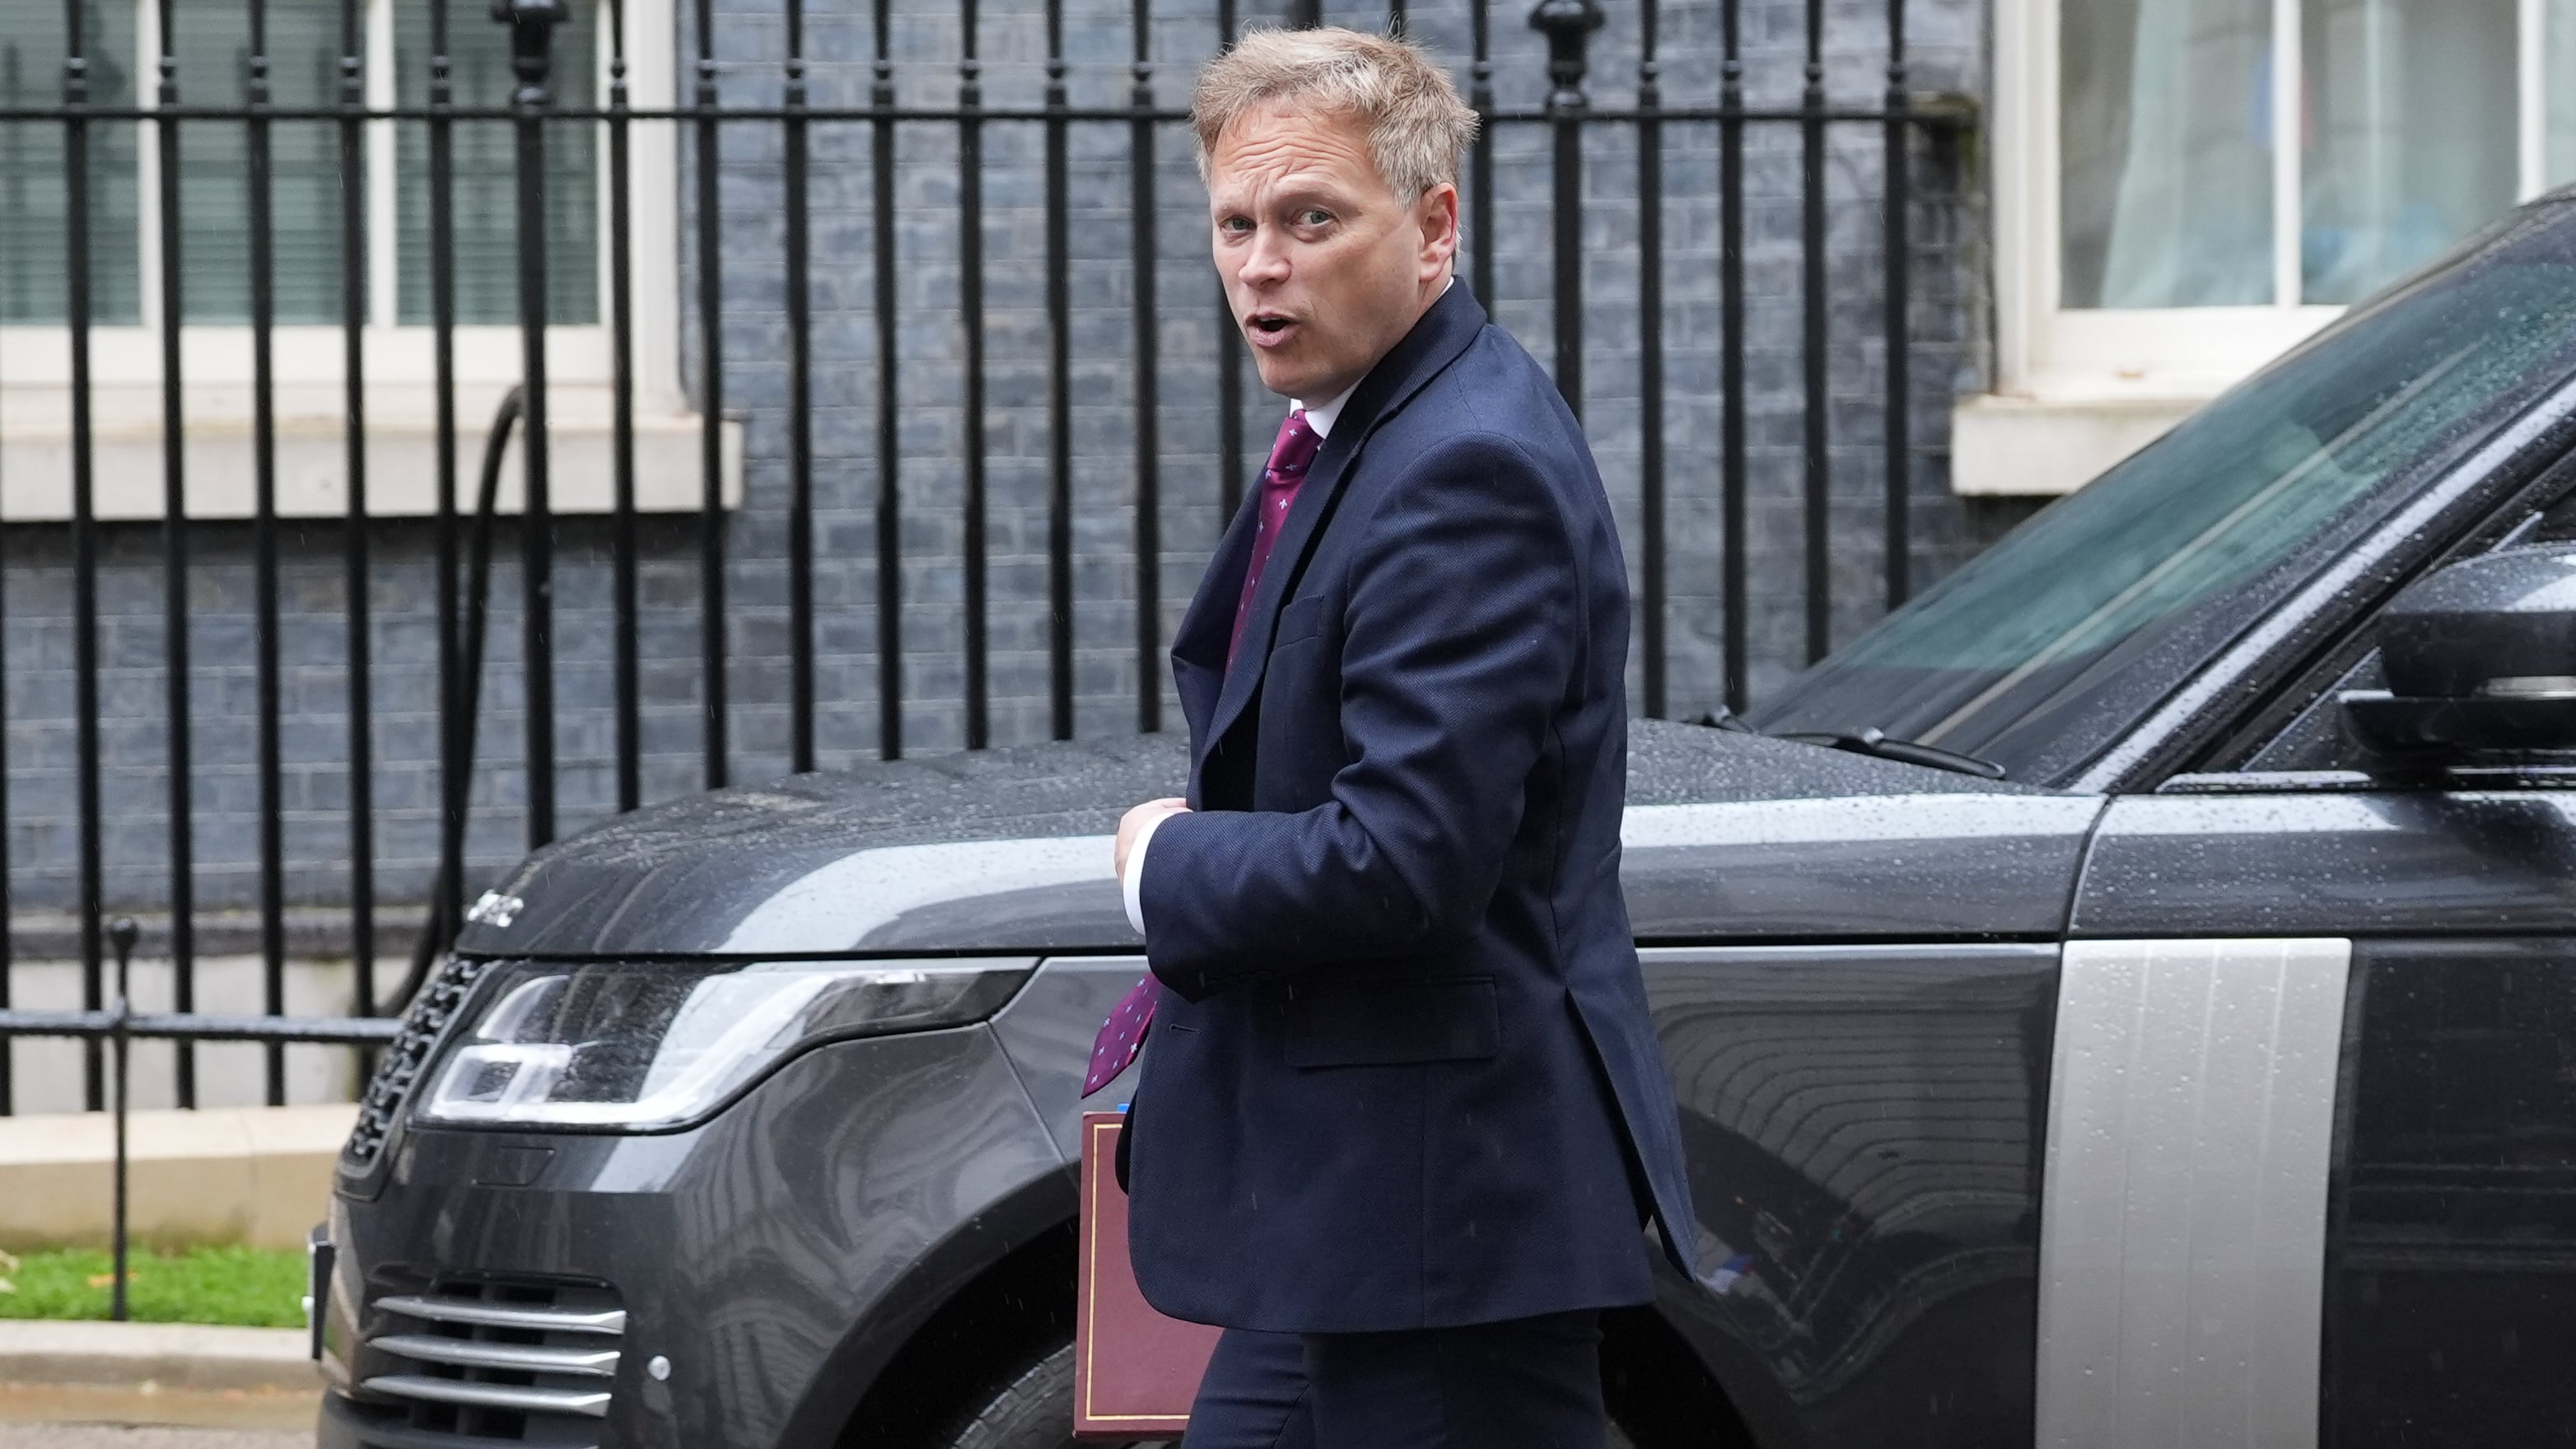 Grant Shapps had held a number of Cabinet roles